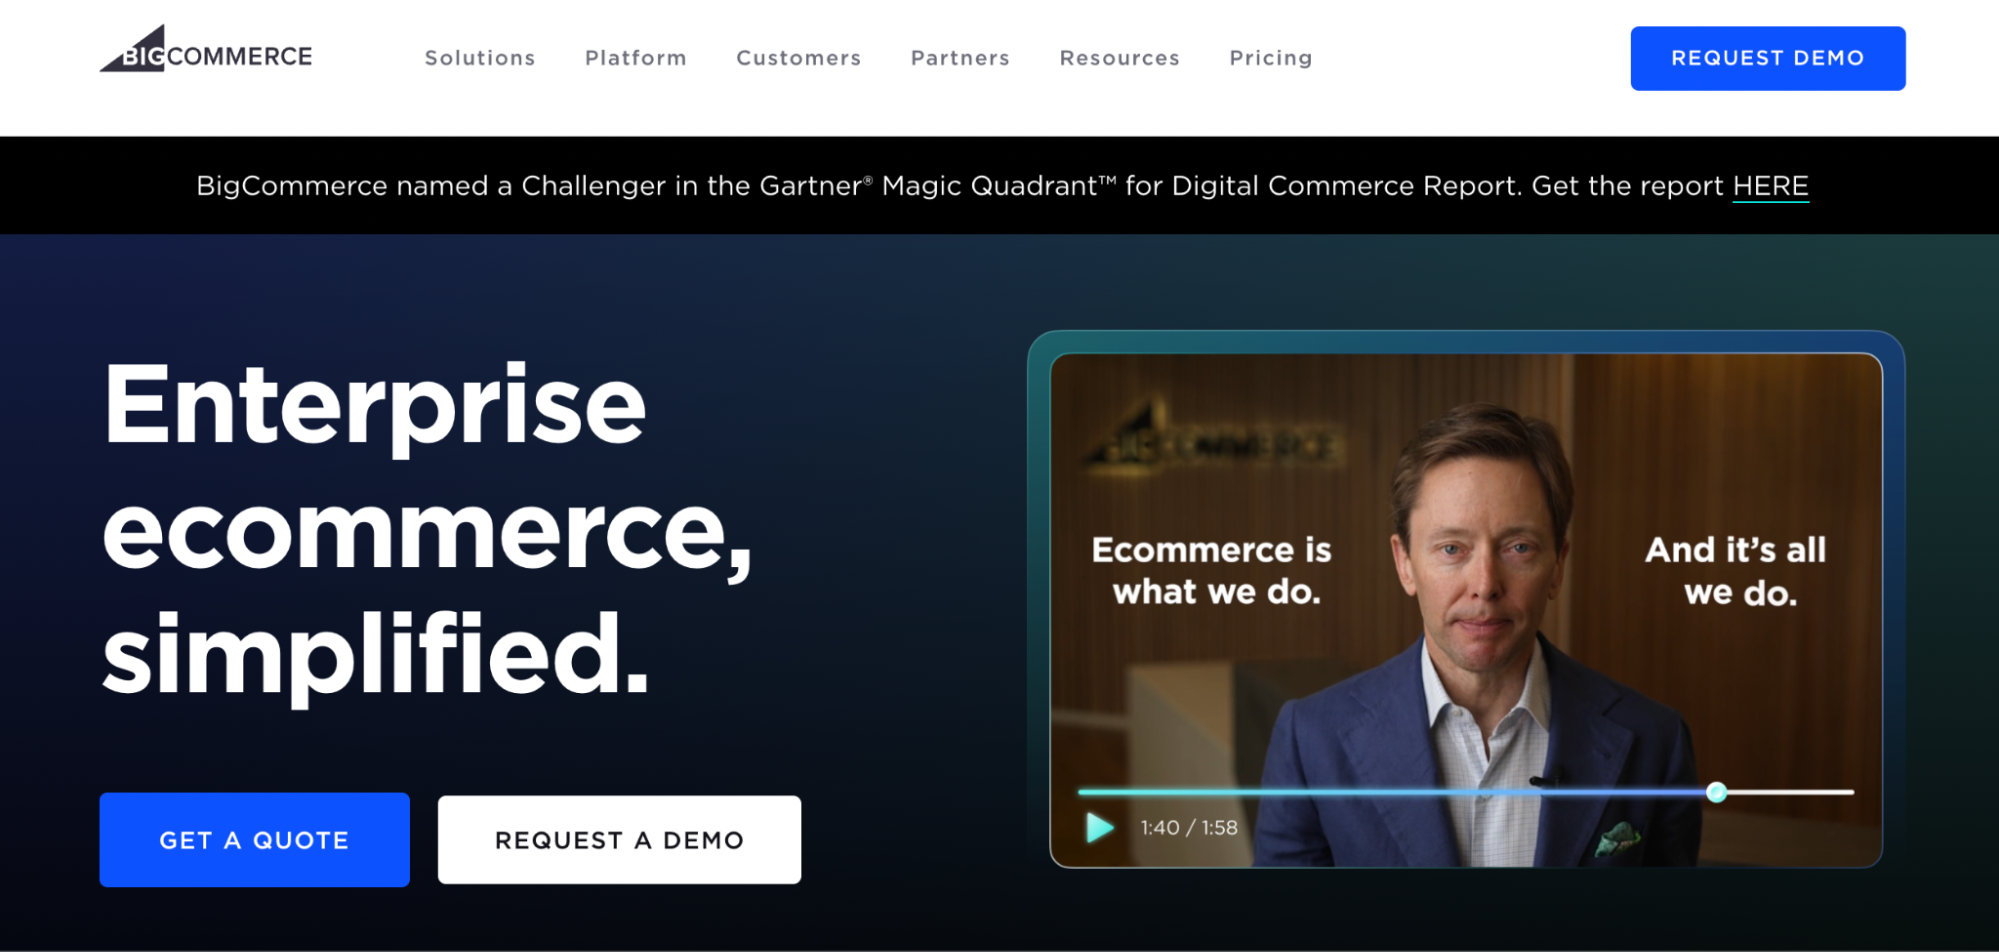 BigCommerce screengrab showing a video of a man next to the words, “Ecommerce is what we do.”